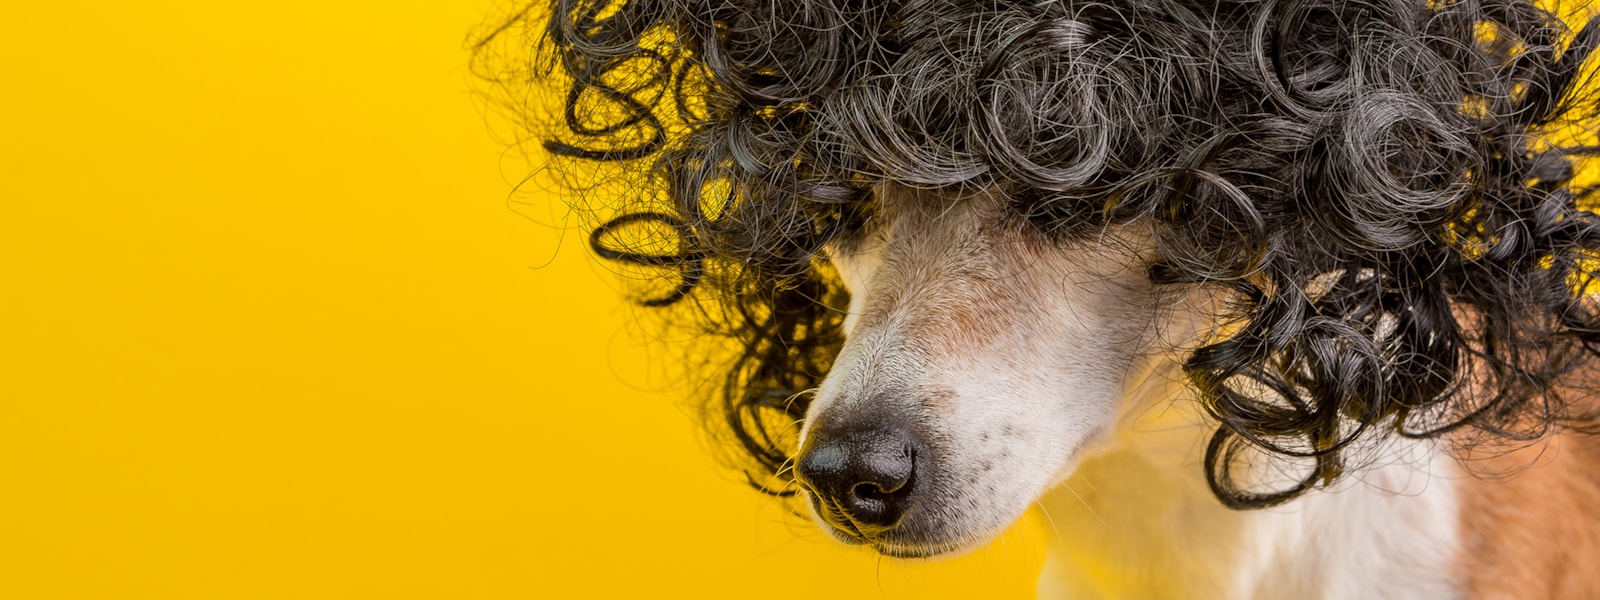 dog in a wig